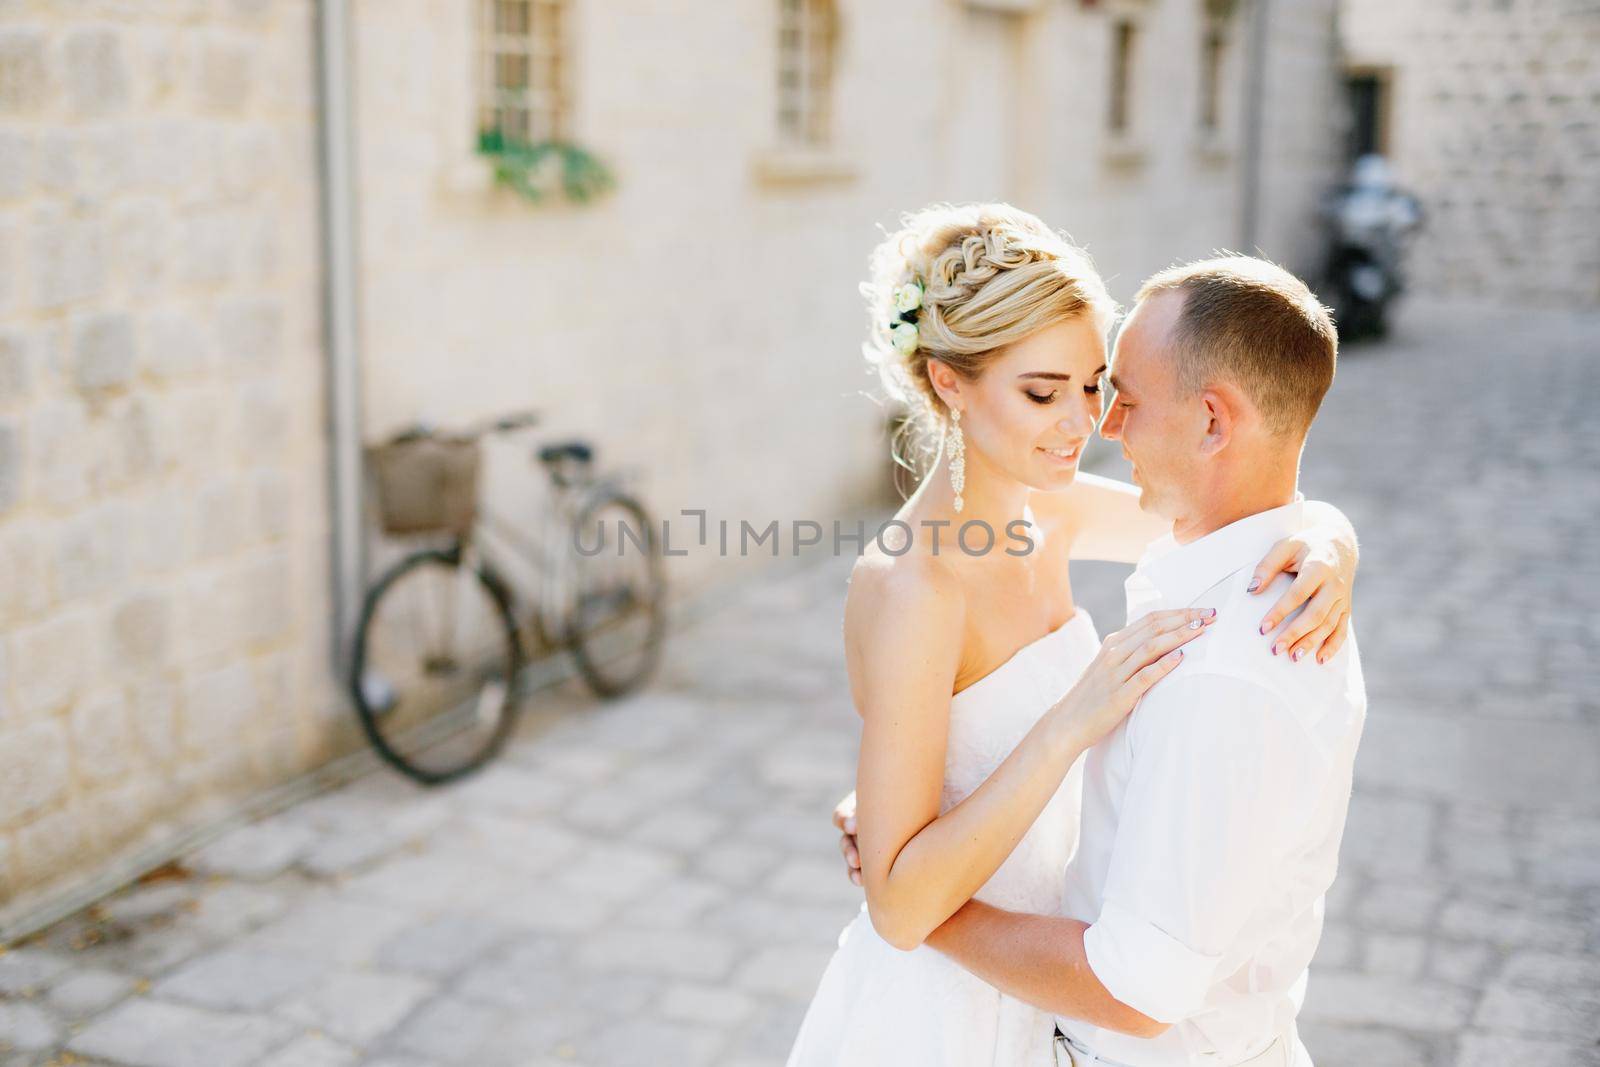 The bride and groom hug on the street of the old town of Perast next to a white building and a bicycle by Nadtochiy